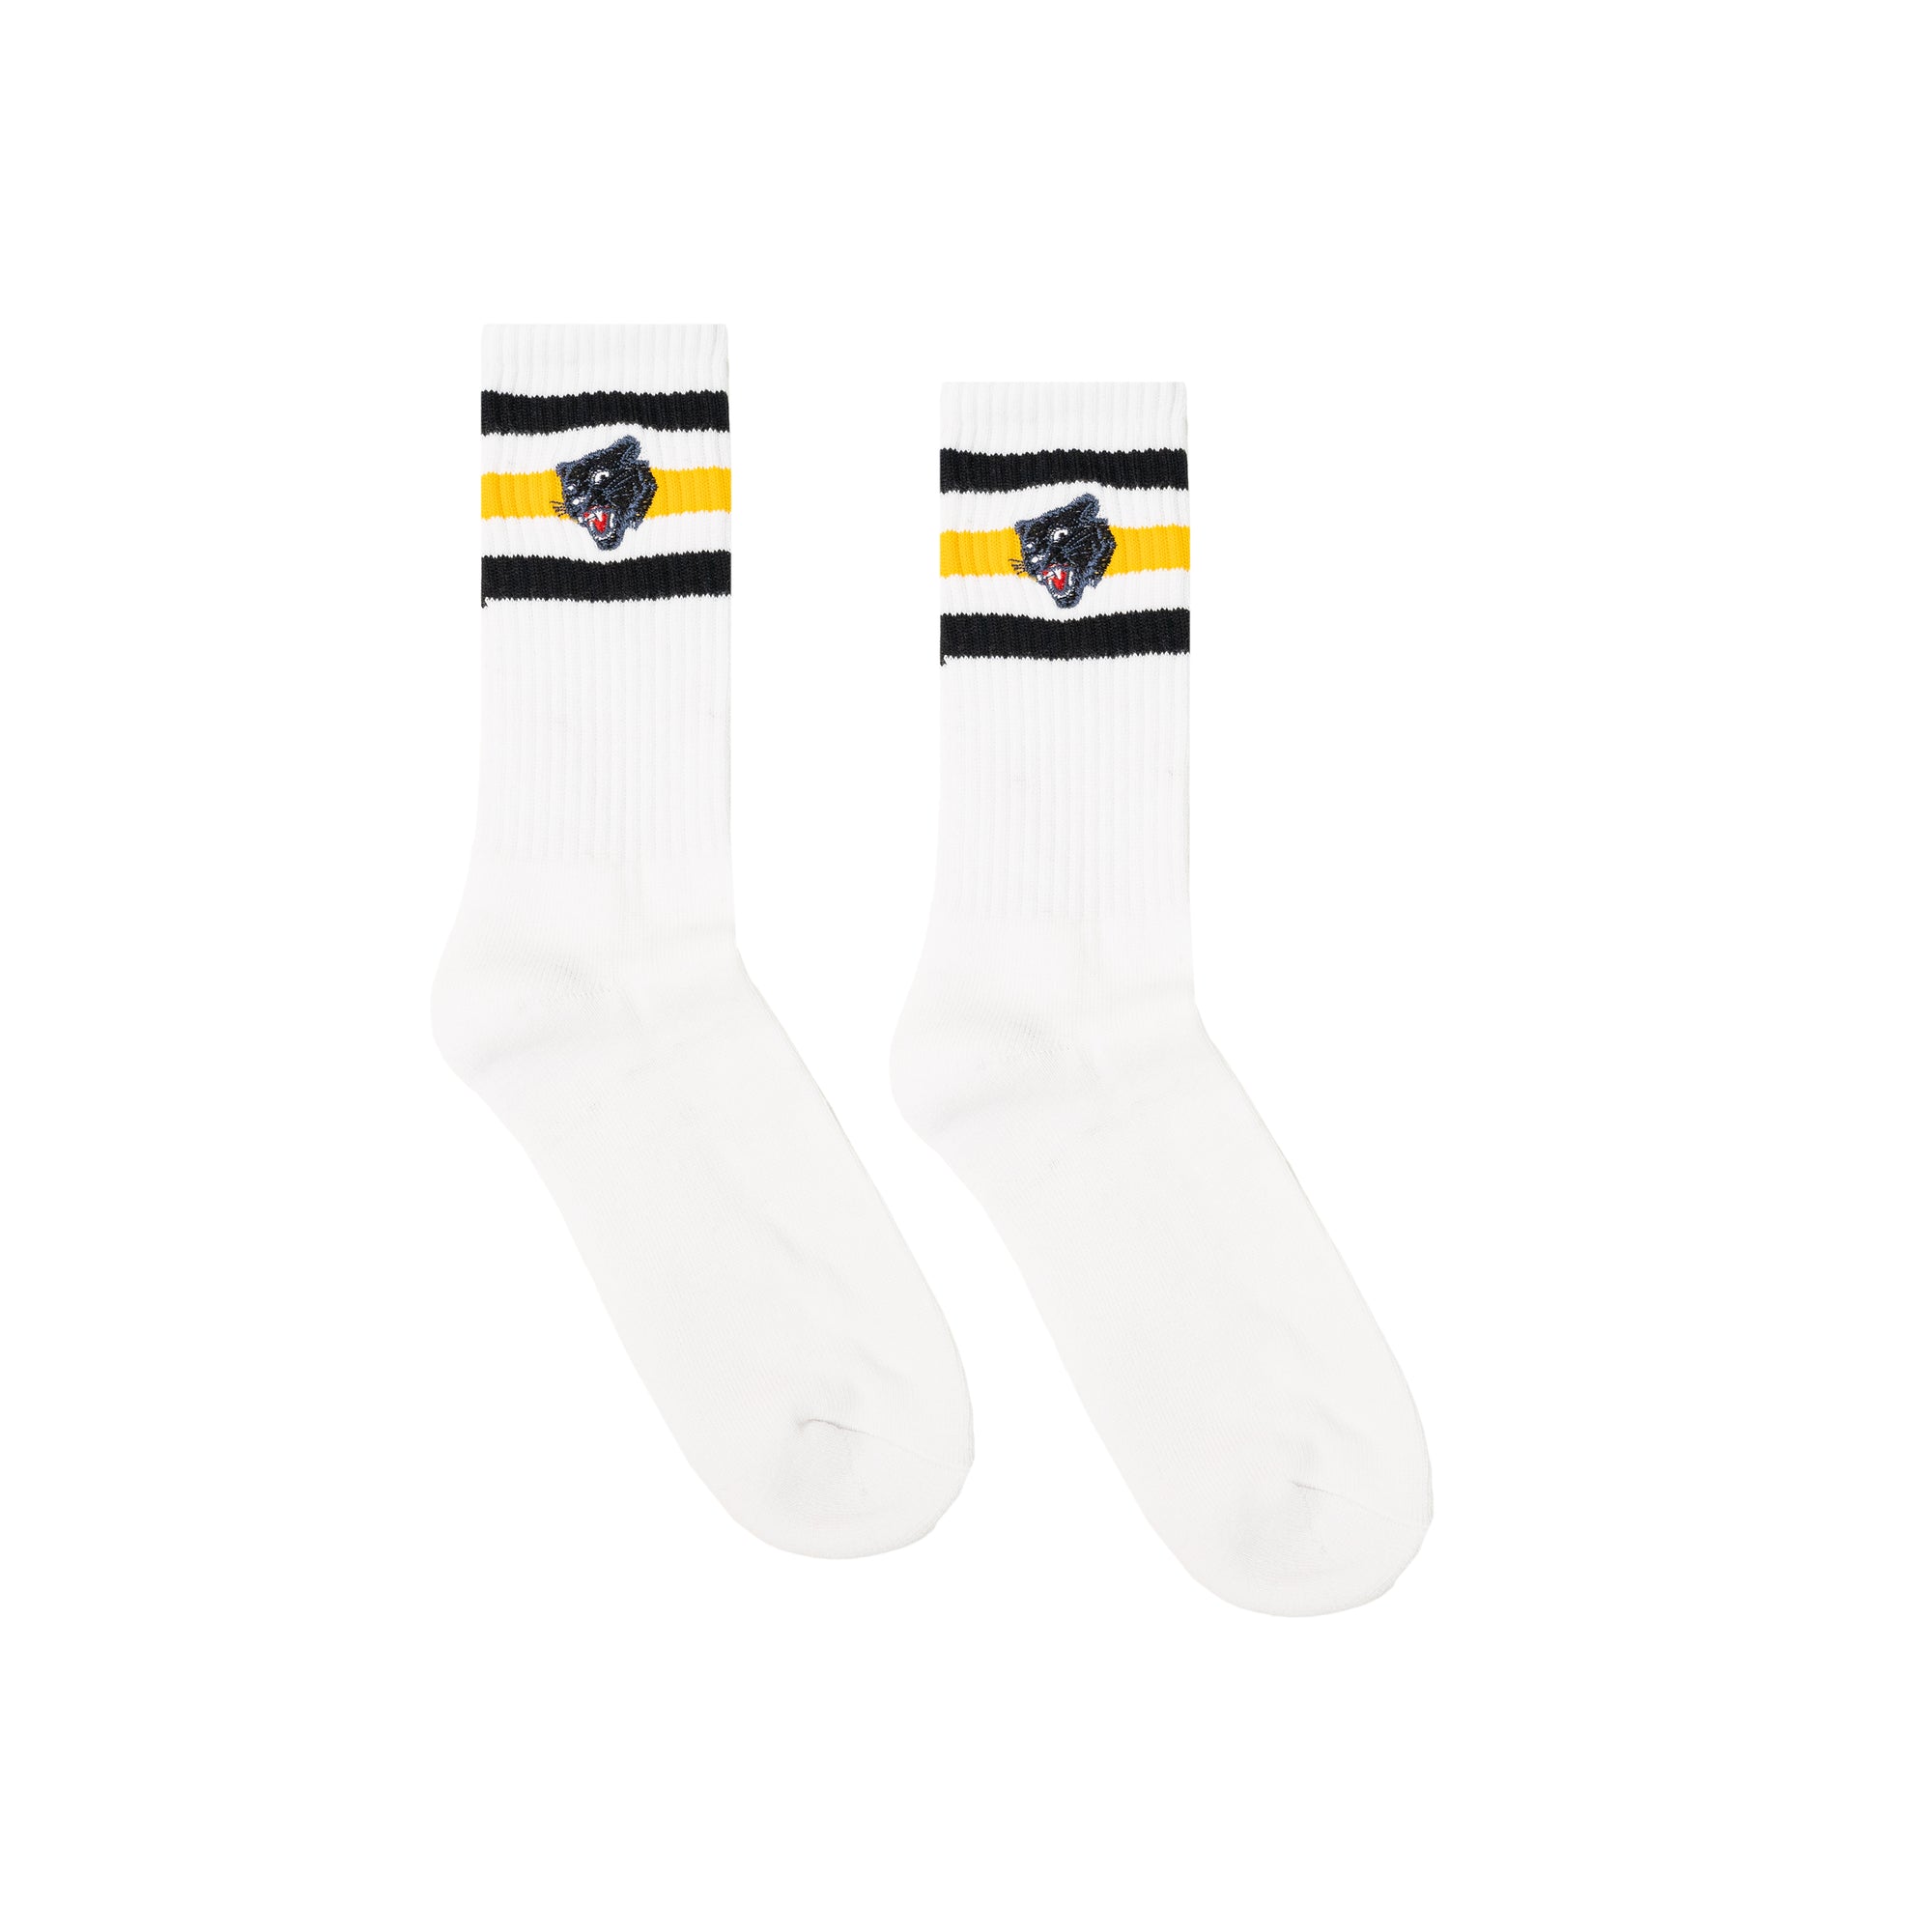 Embroidered panther socks white/yellow/black